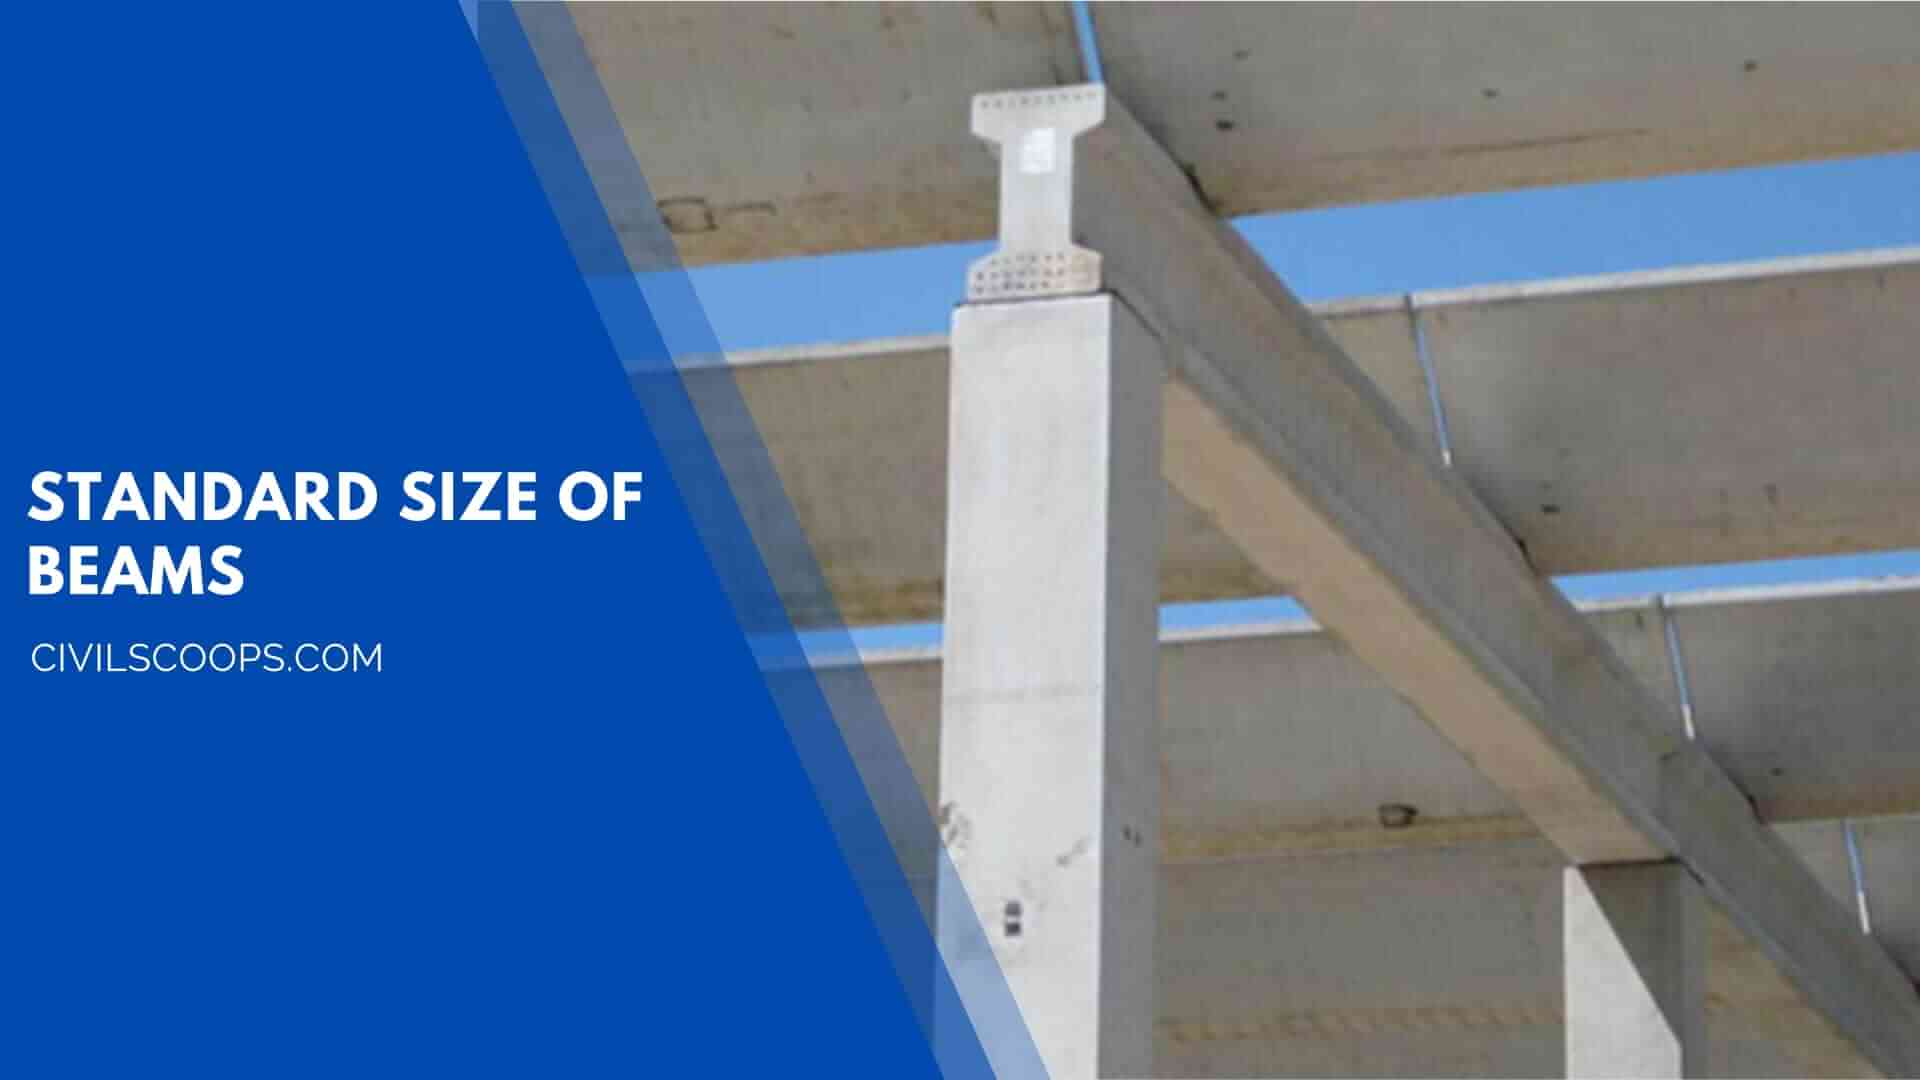 Standard Size of Beams